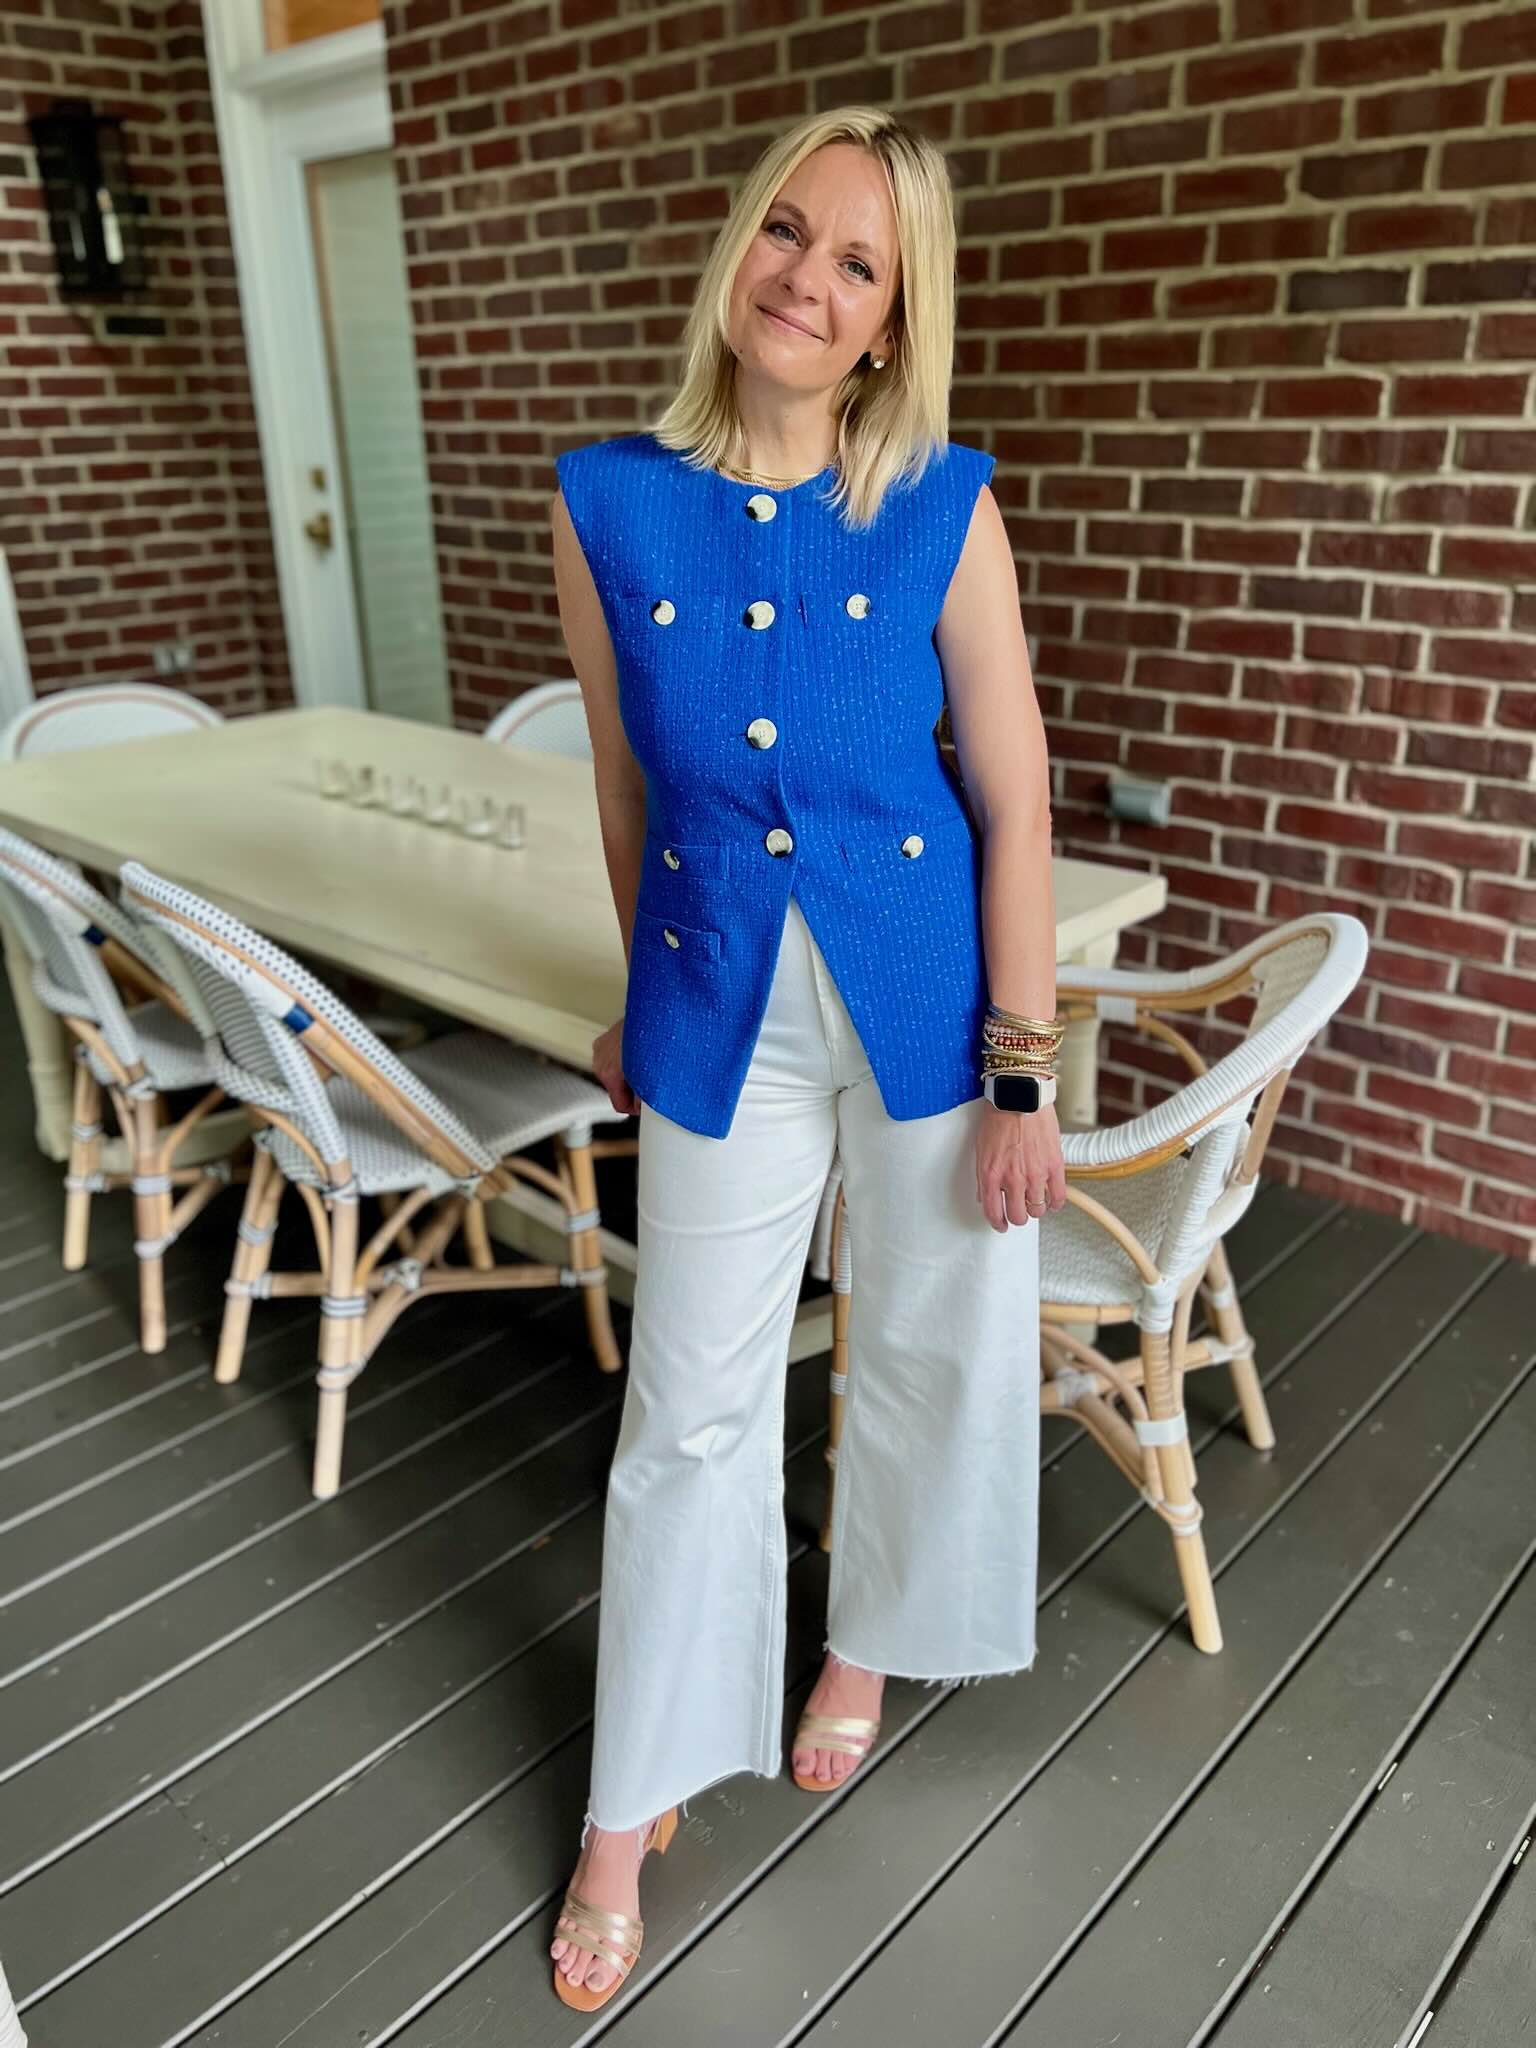 Tailored Vest & Wide Leg Jeans how to style a vest how to wear white jeans to work summer office style summer work outfit how to style wide leg jeans nashville personal stylists share summer must haves